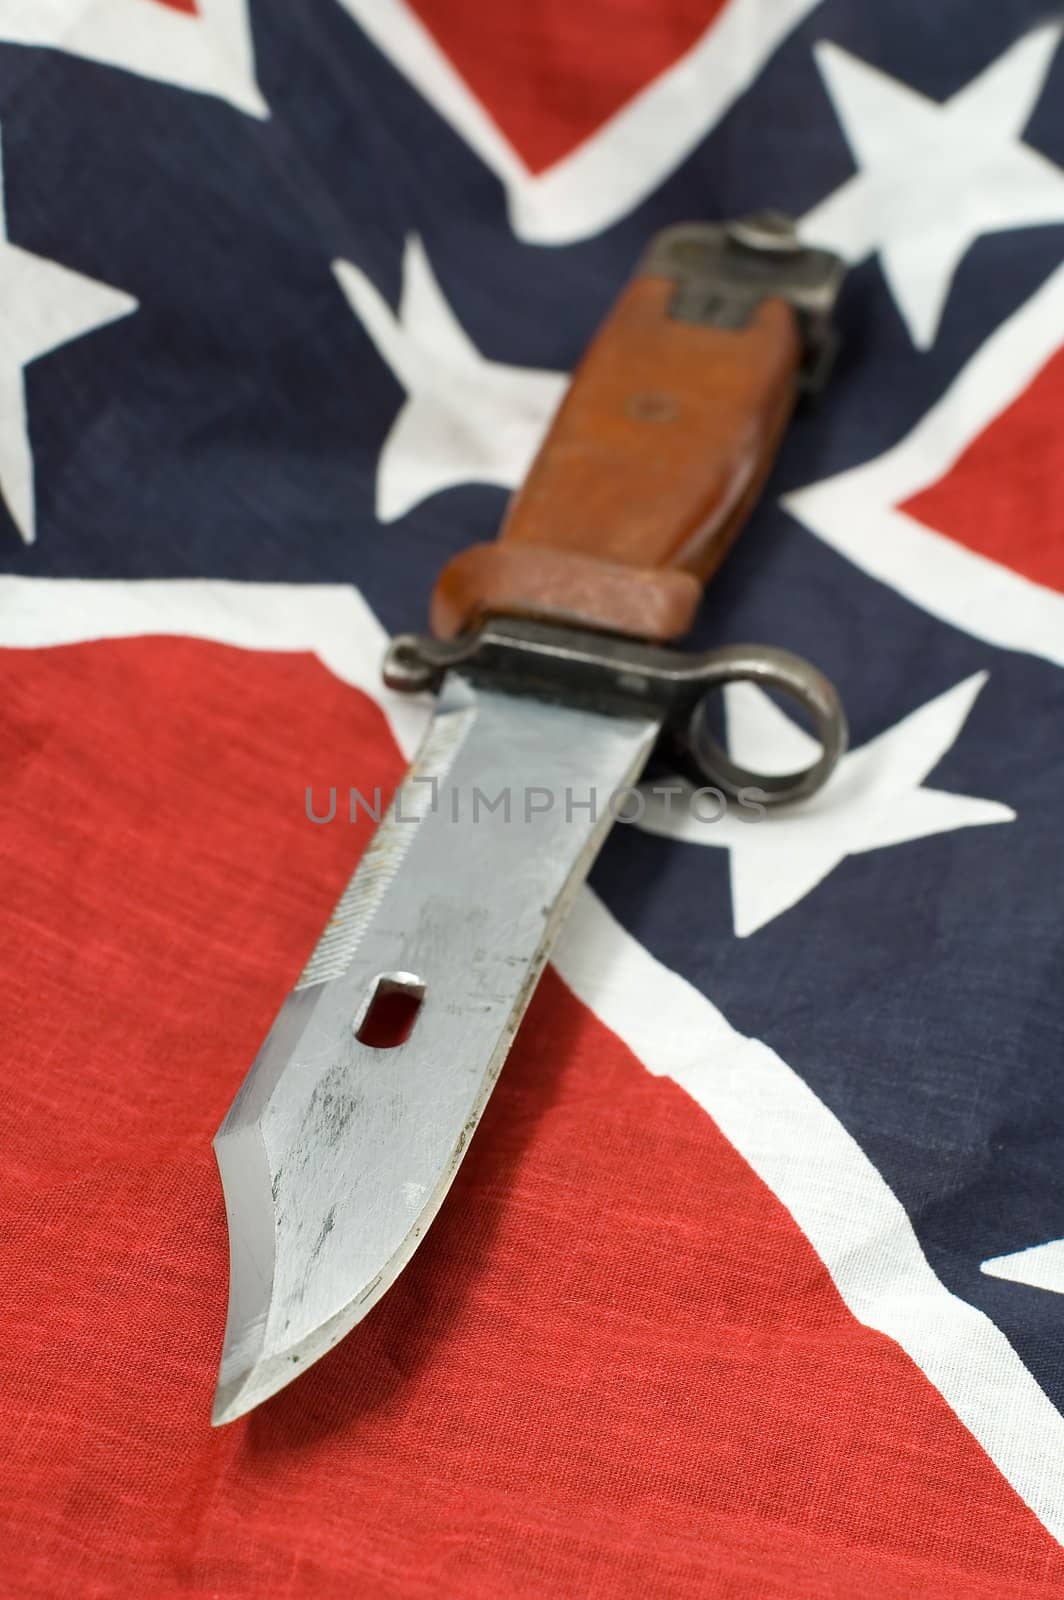 army knife on Flag of the Confederate States of America 